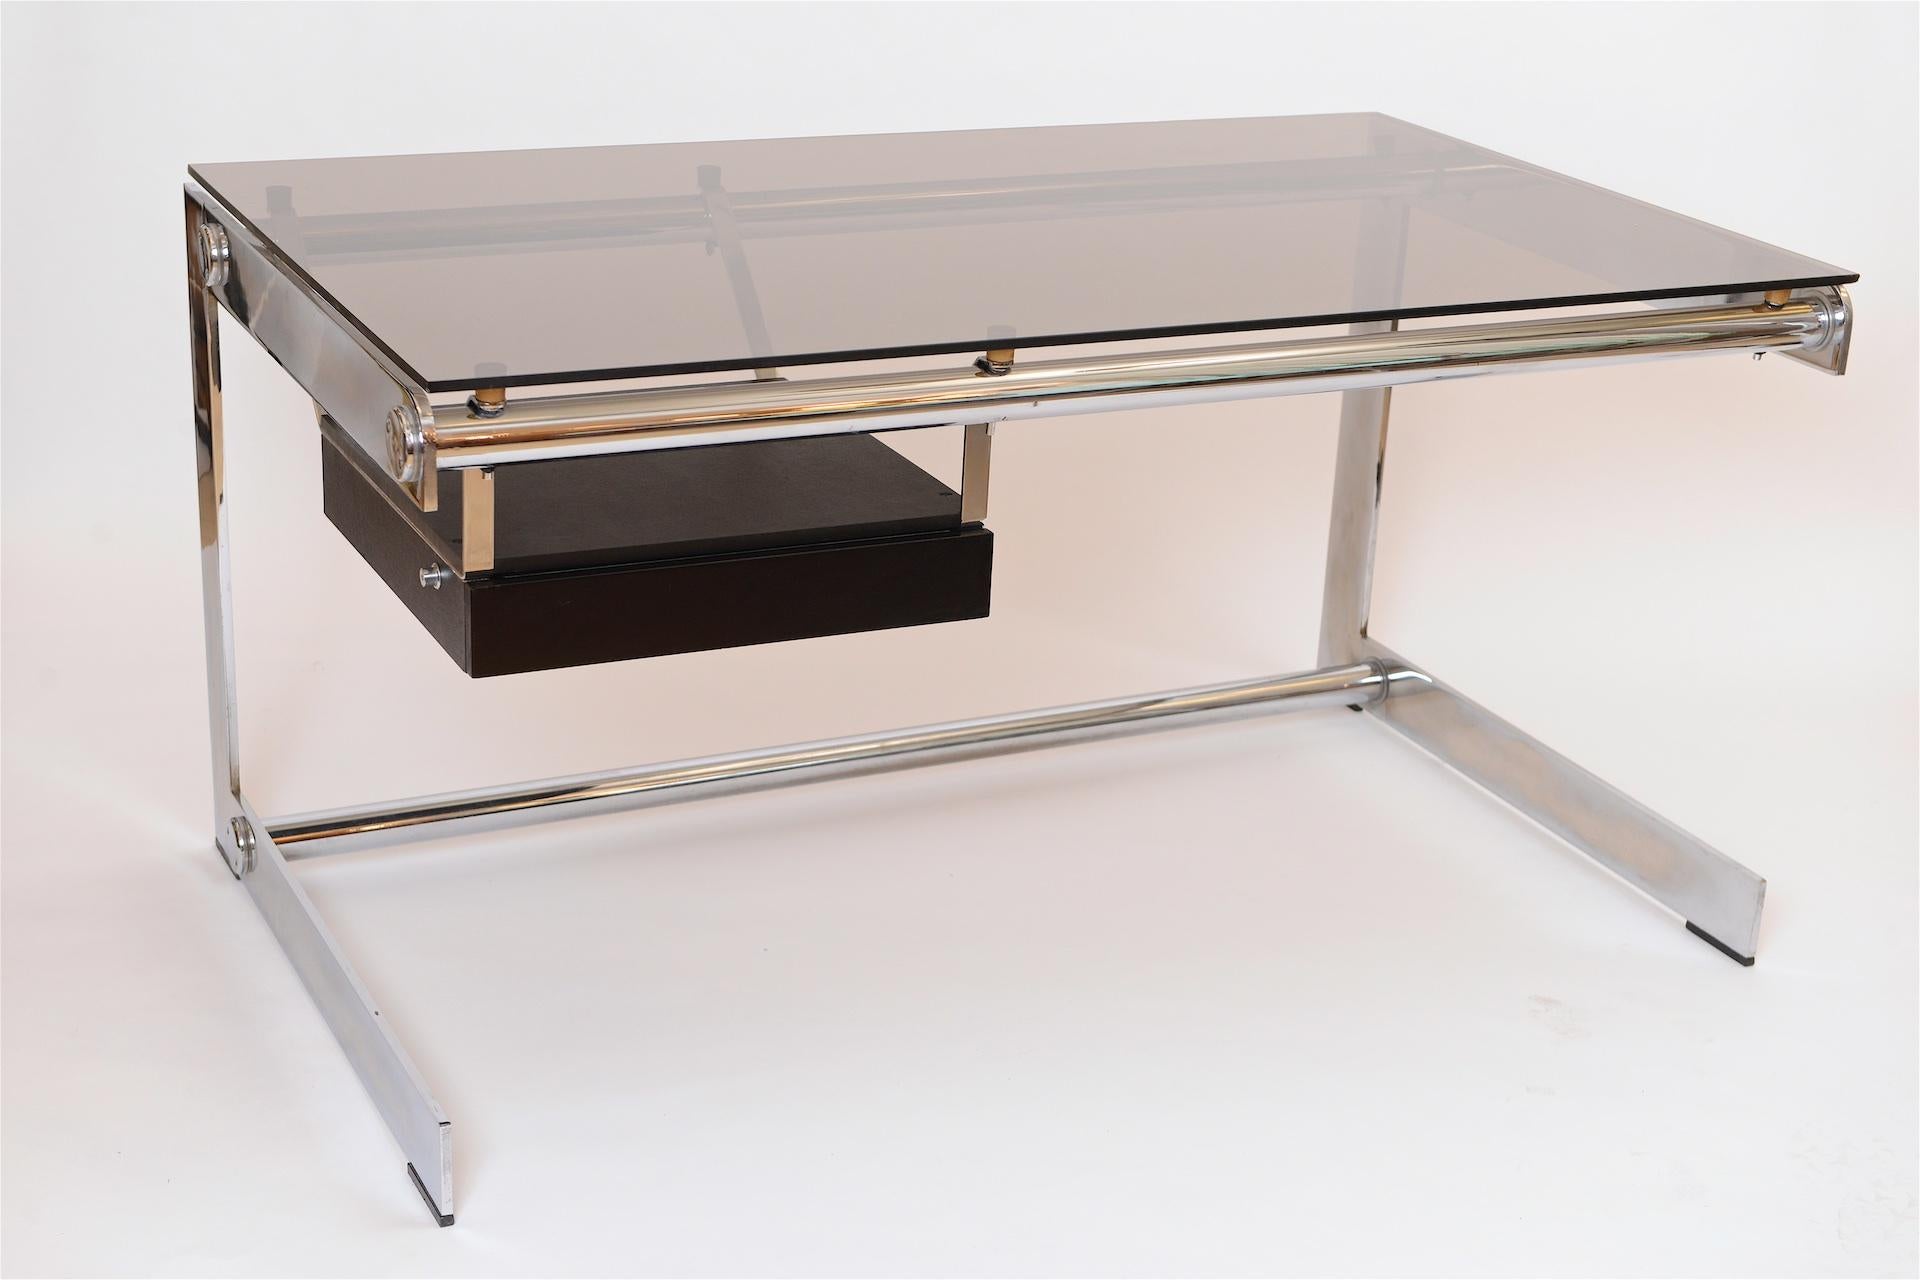 French Rare Gilles Bouchez Chrome and Glass Desk for Airbourne, circa 1965